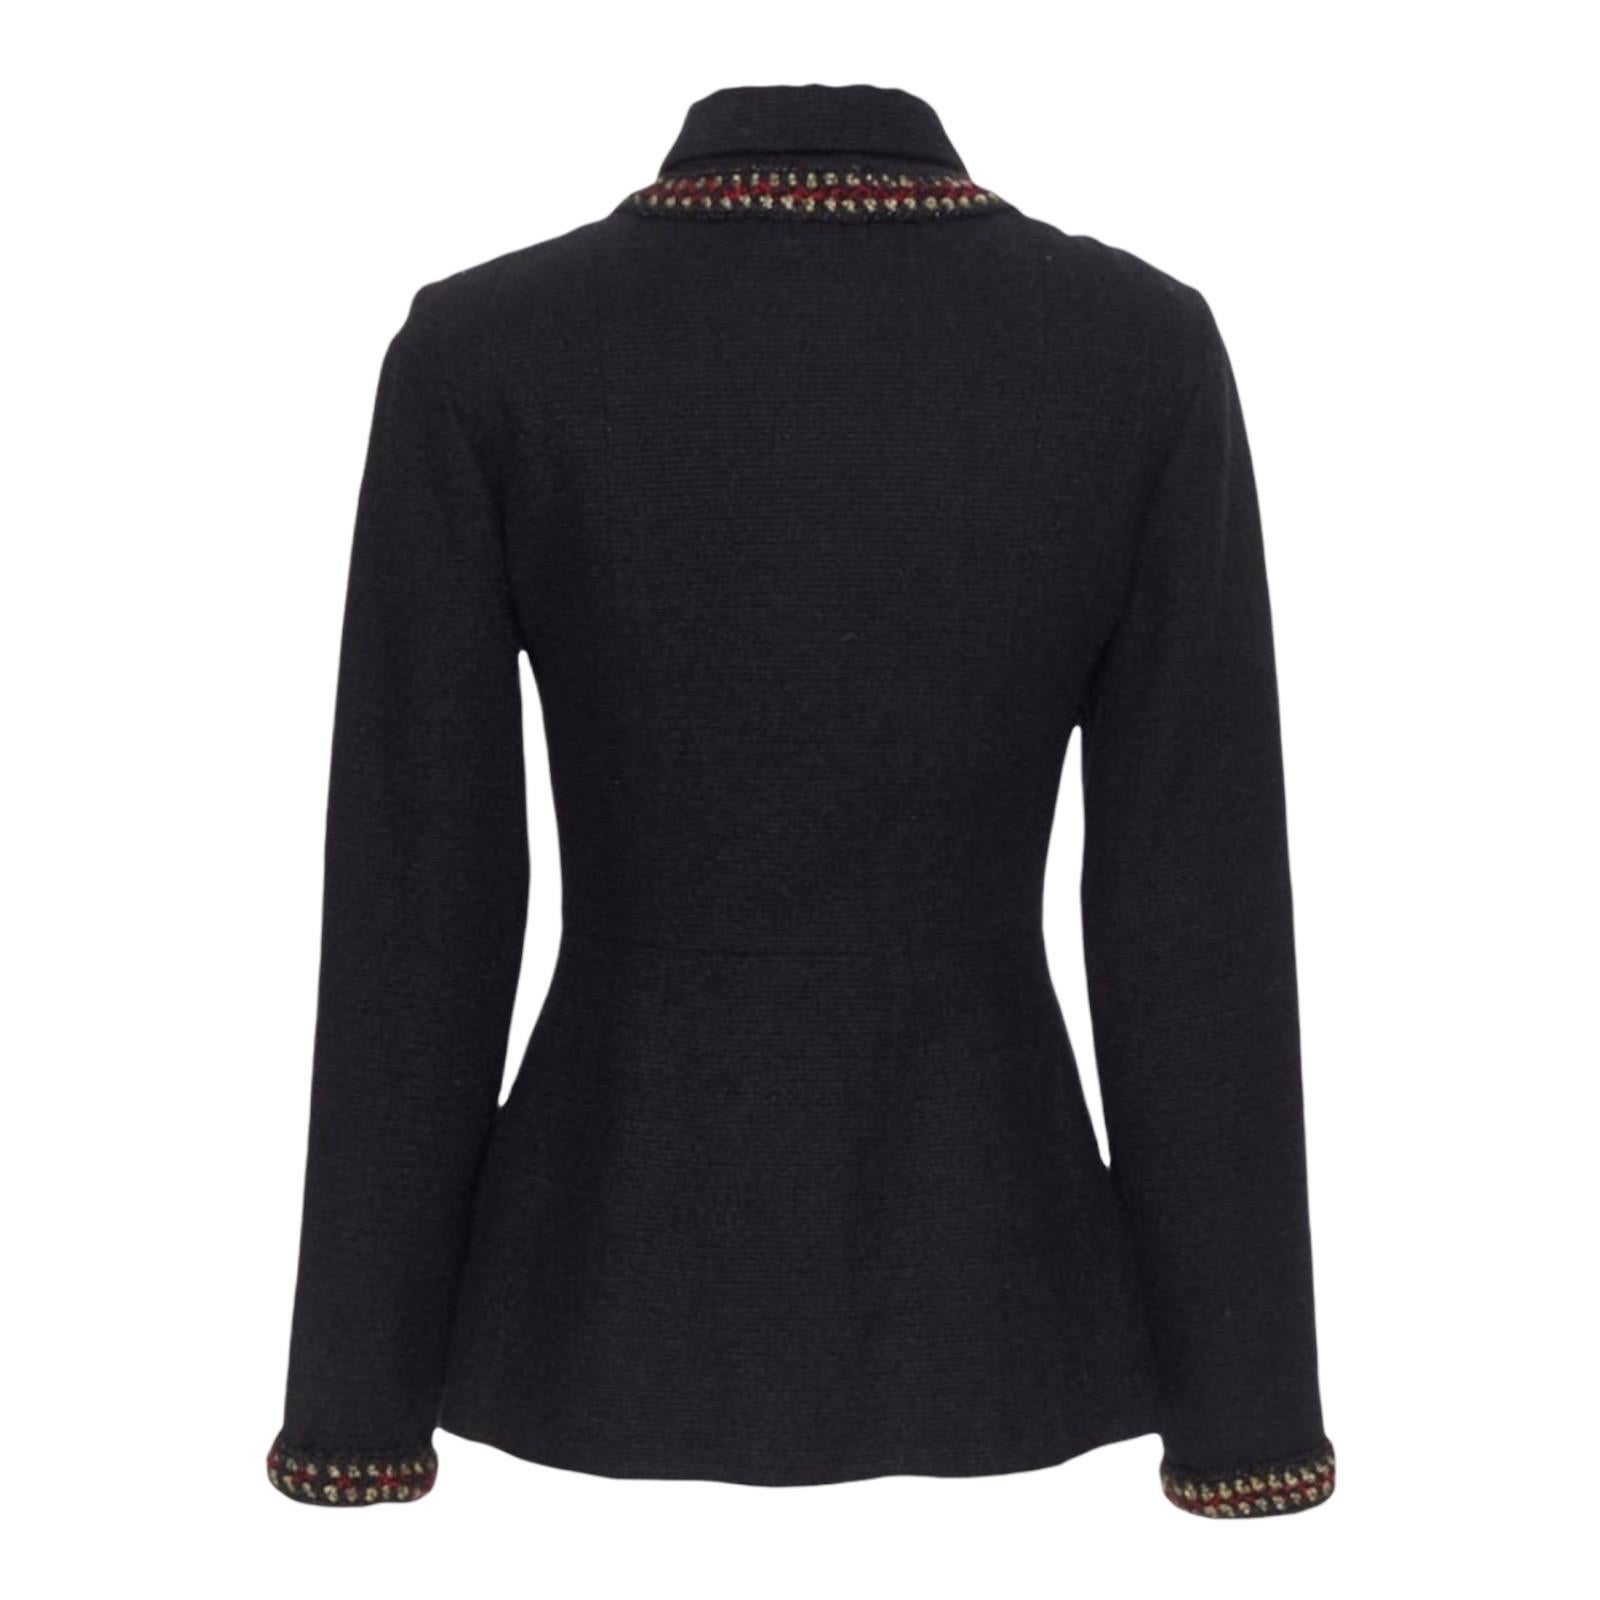 CHANEL Shanghai Métiers d'Art Black Tweed Blazer Jacket with Braided Details 38 For Sale 1